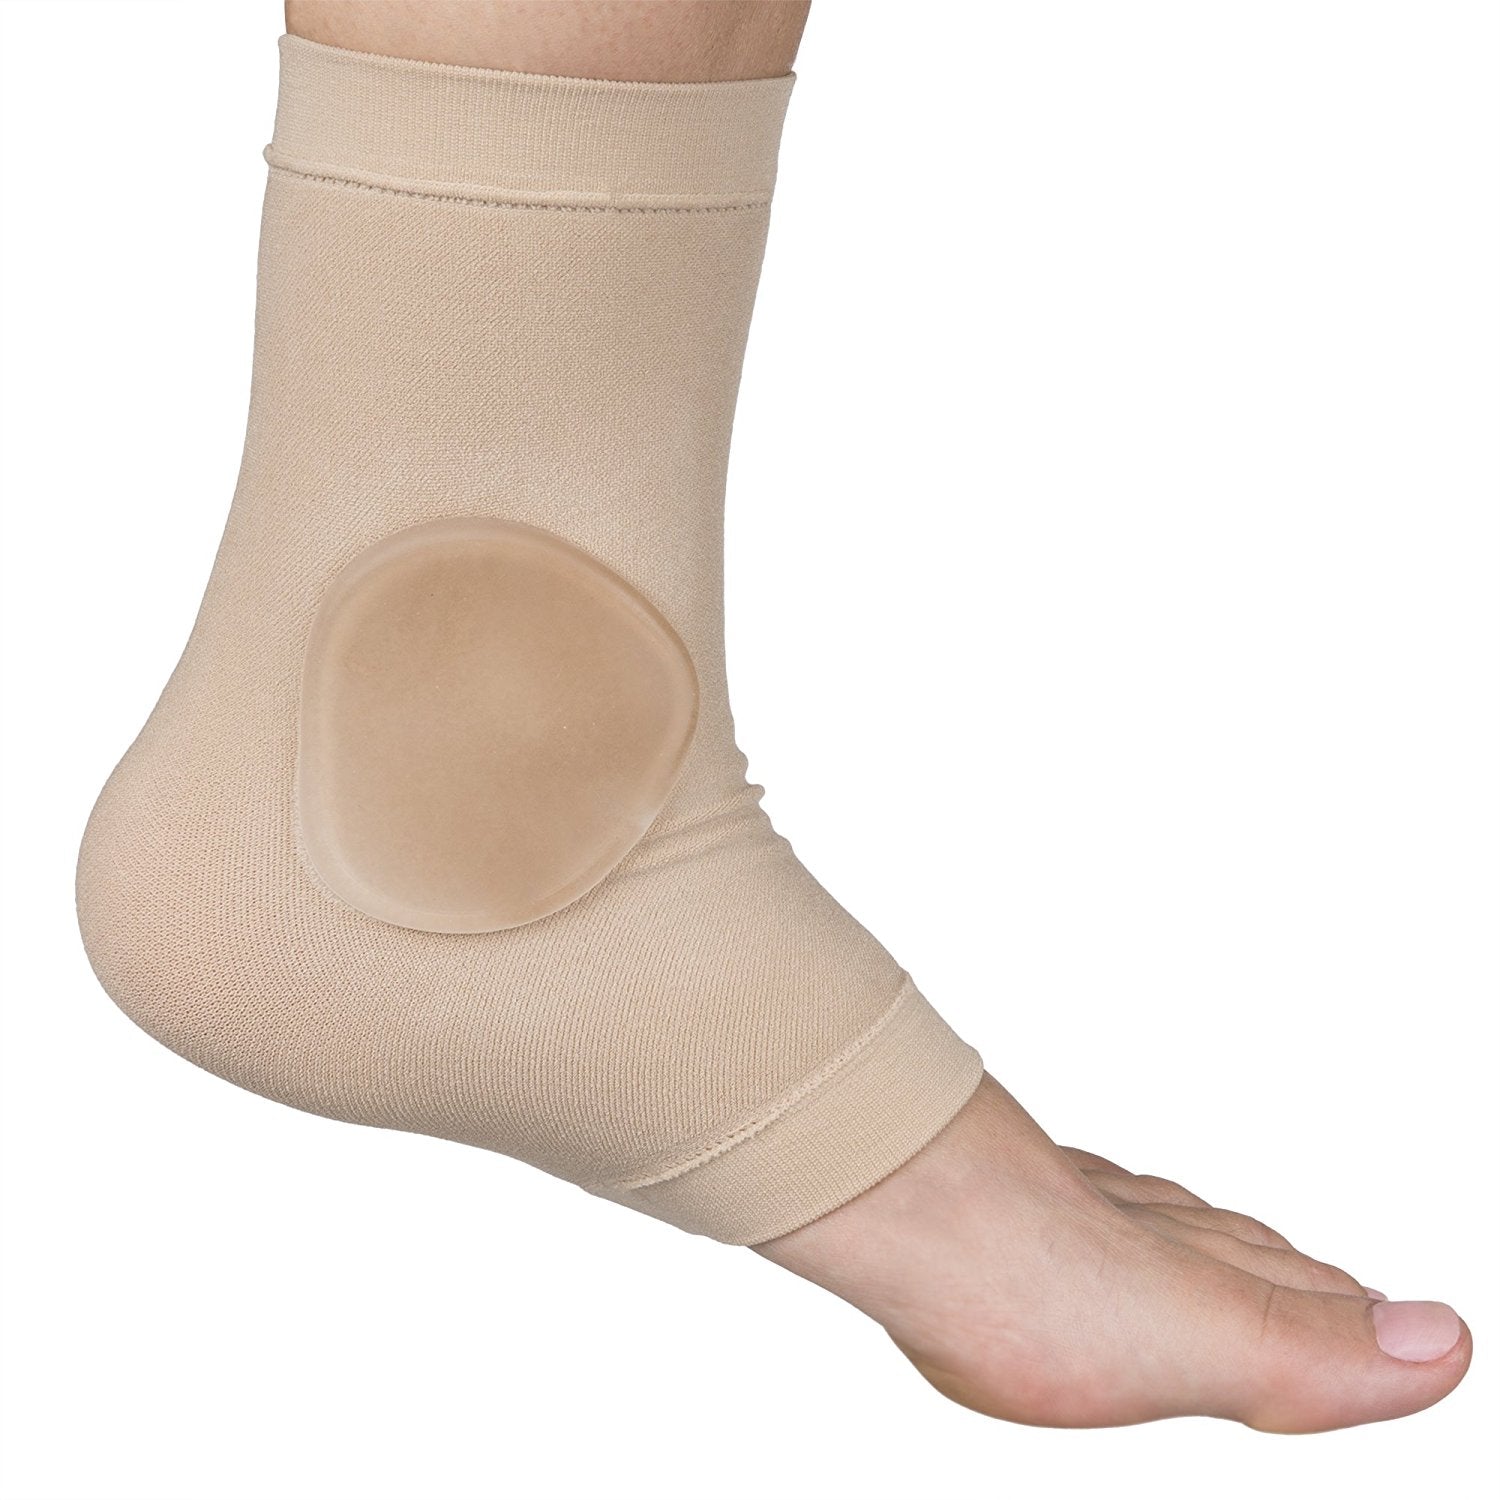 ZenToes Ankle Bone Protection Socks Malleolar Sleeves with Gel Pads